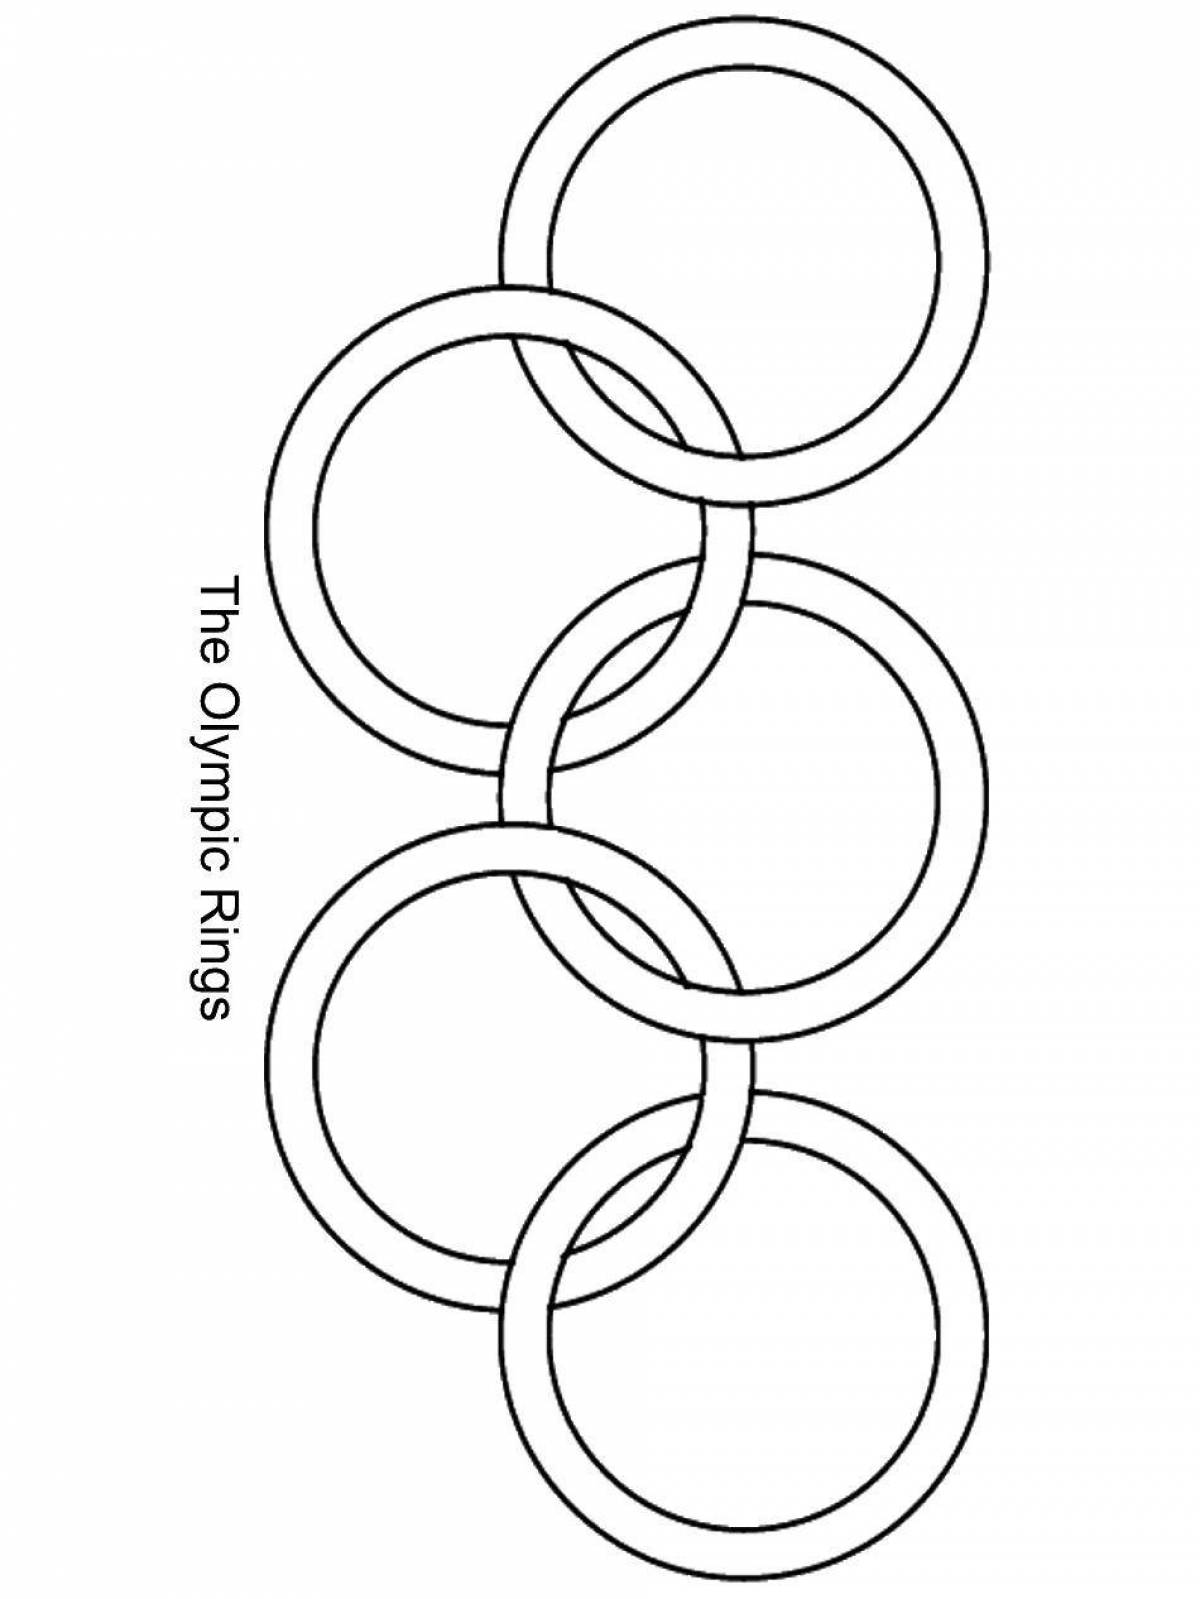 Coloring of exemplary rings of the olympic games